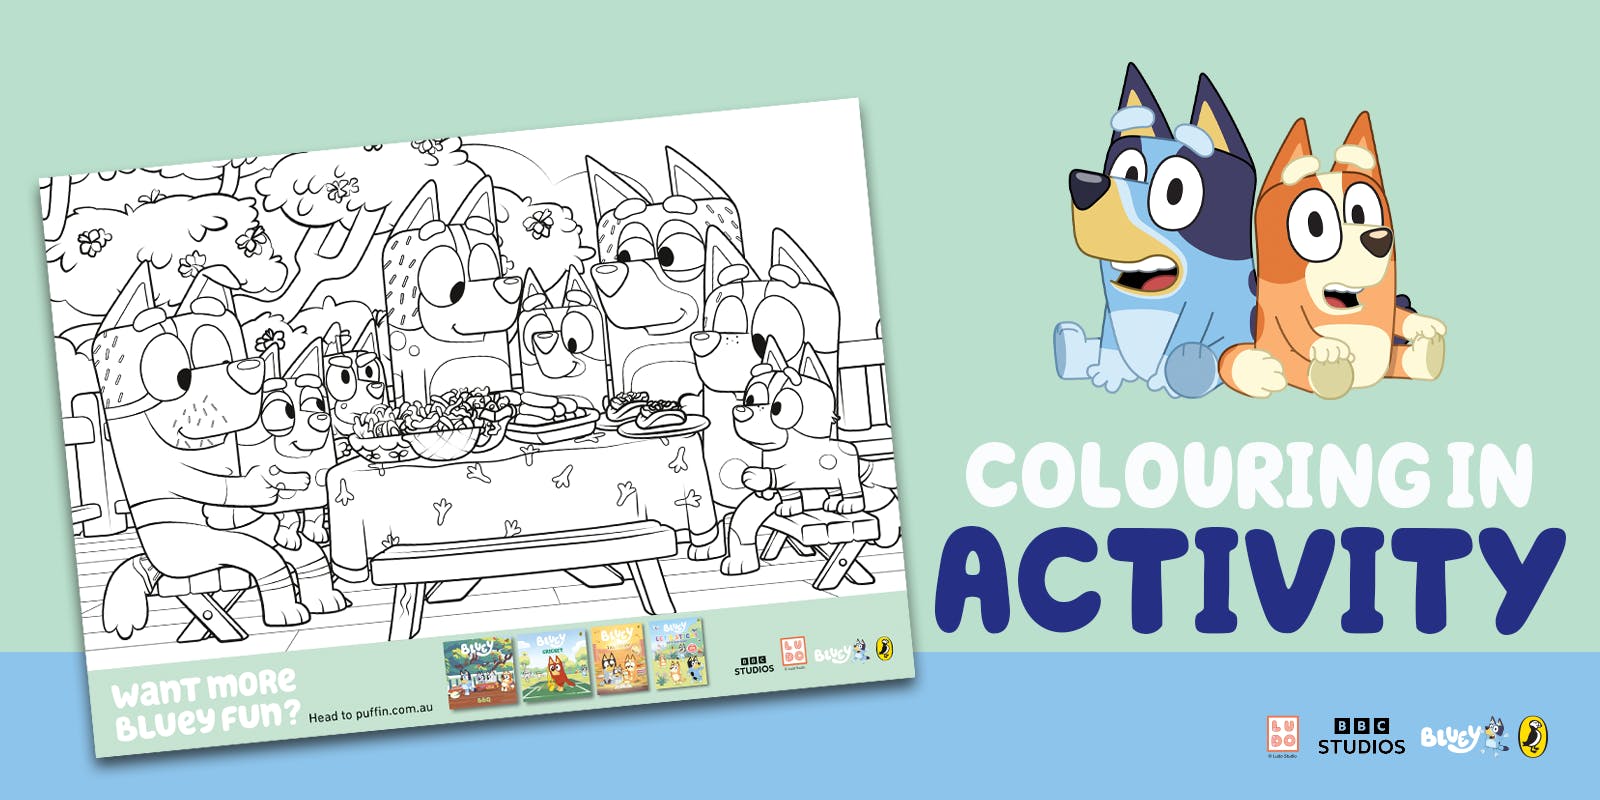 Bluey: BBQ colouring-in activity